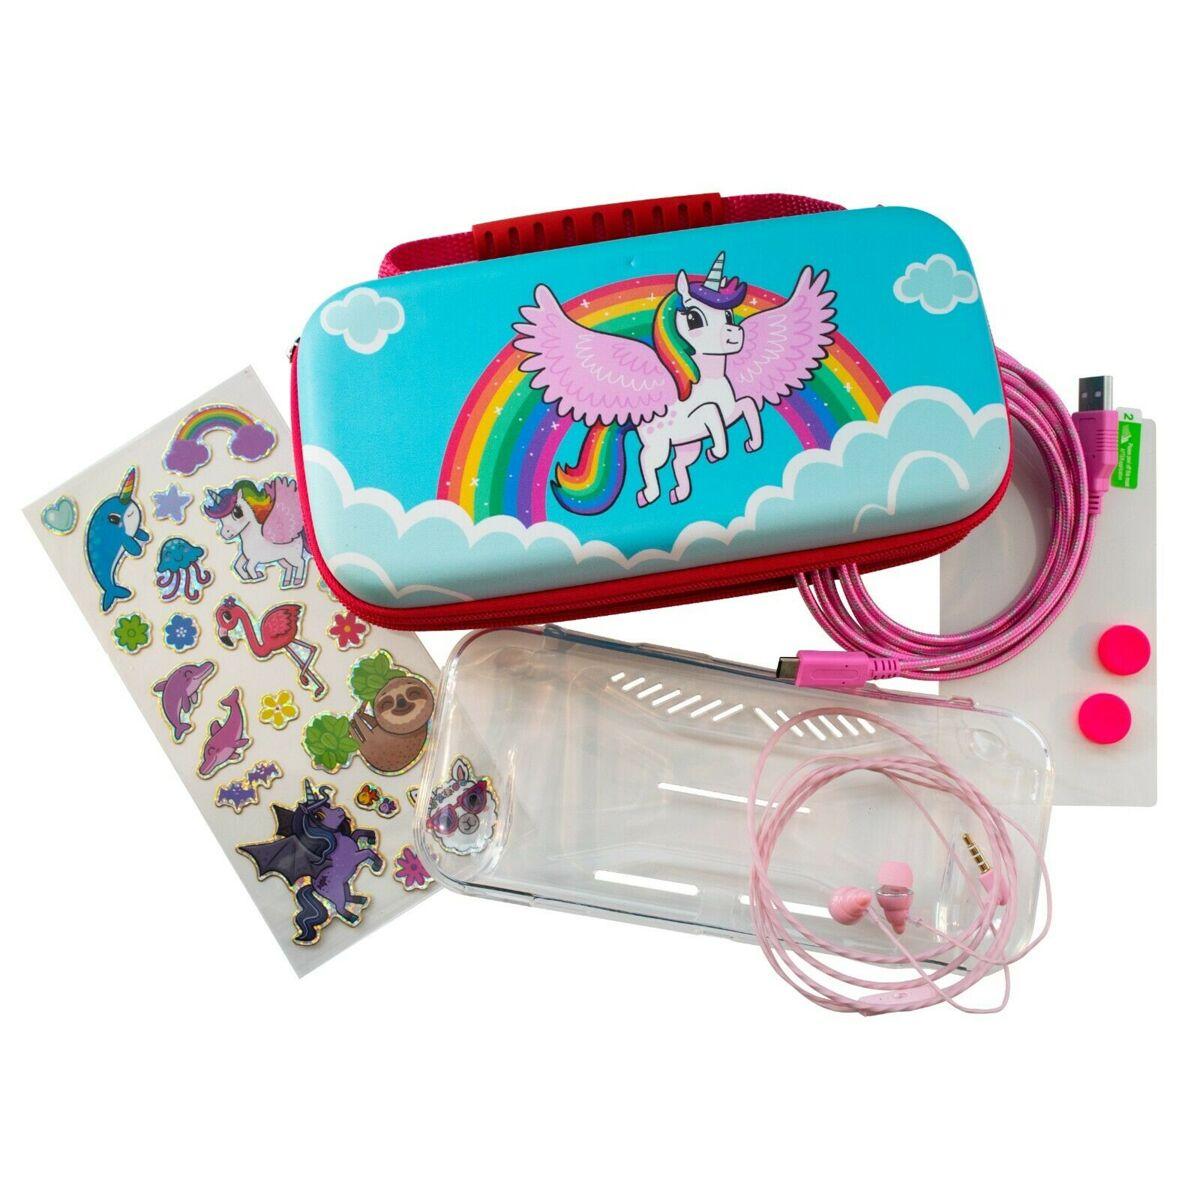 NS IMP Switch LITE Over The Rainbow Unicorn Protector Kit (7 in 1)